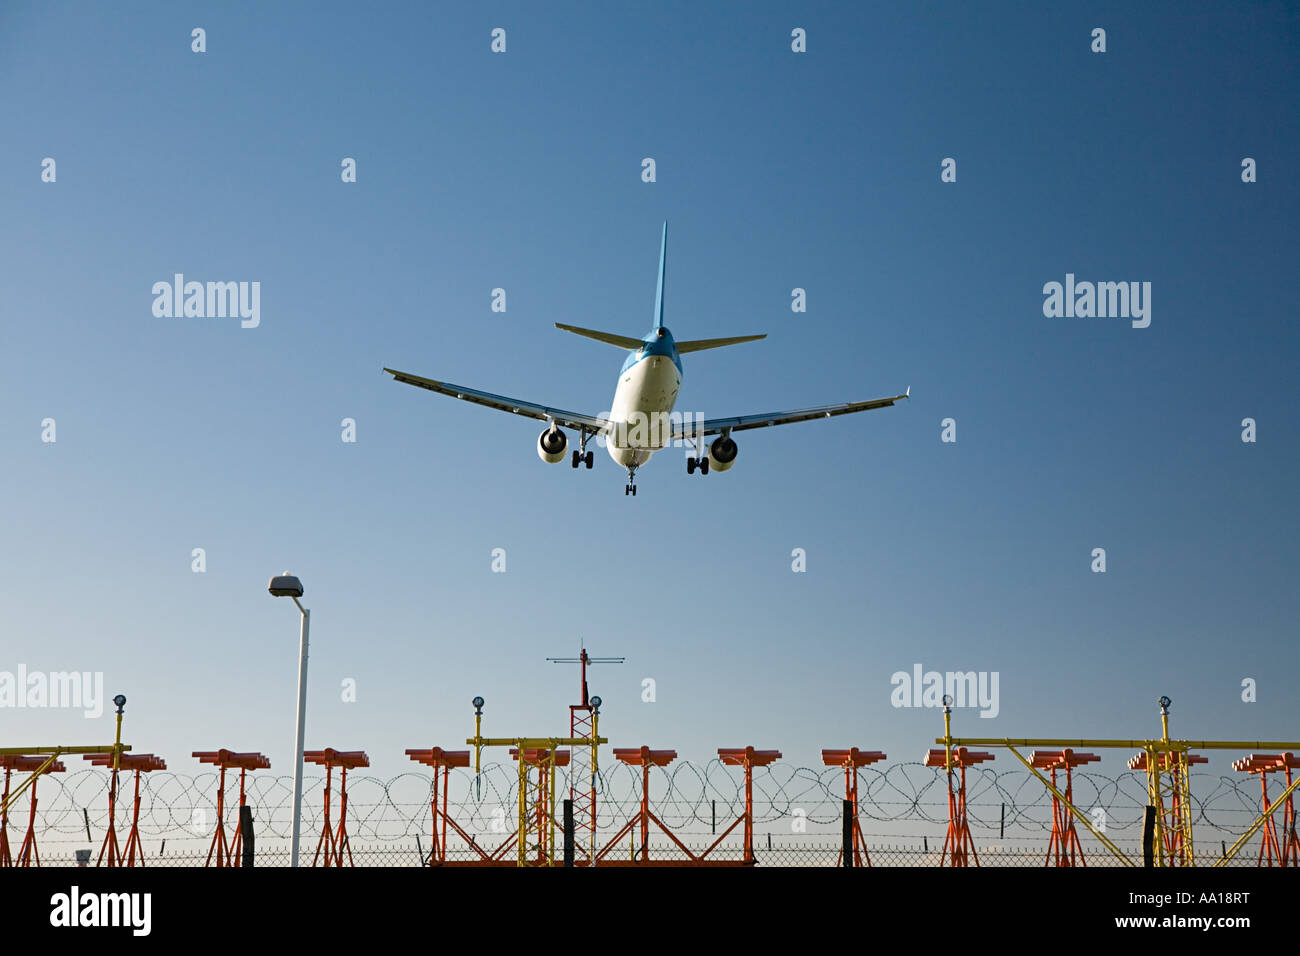 Aeroplane coming in to land Stock Photo